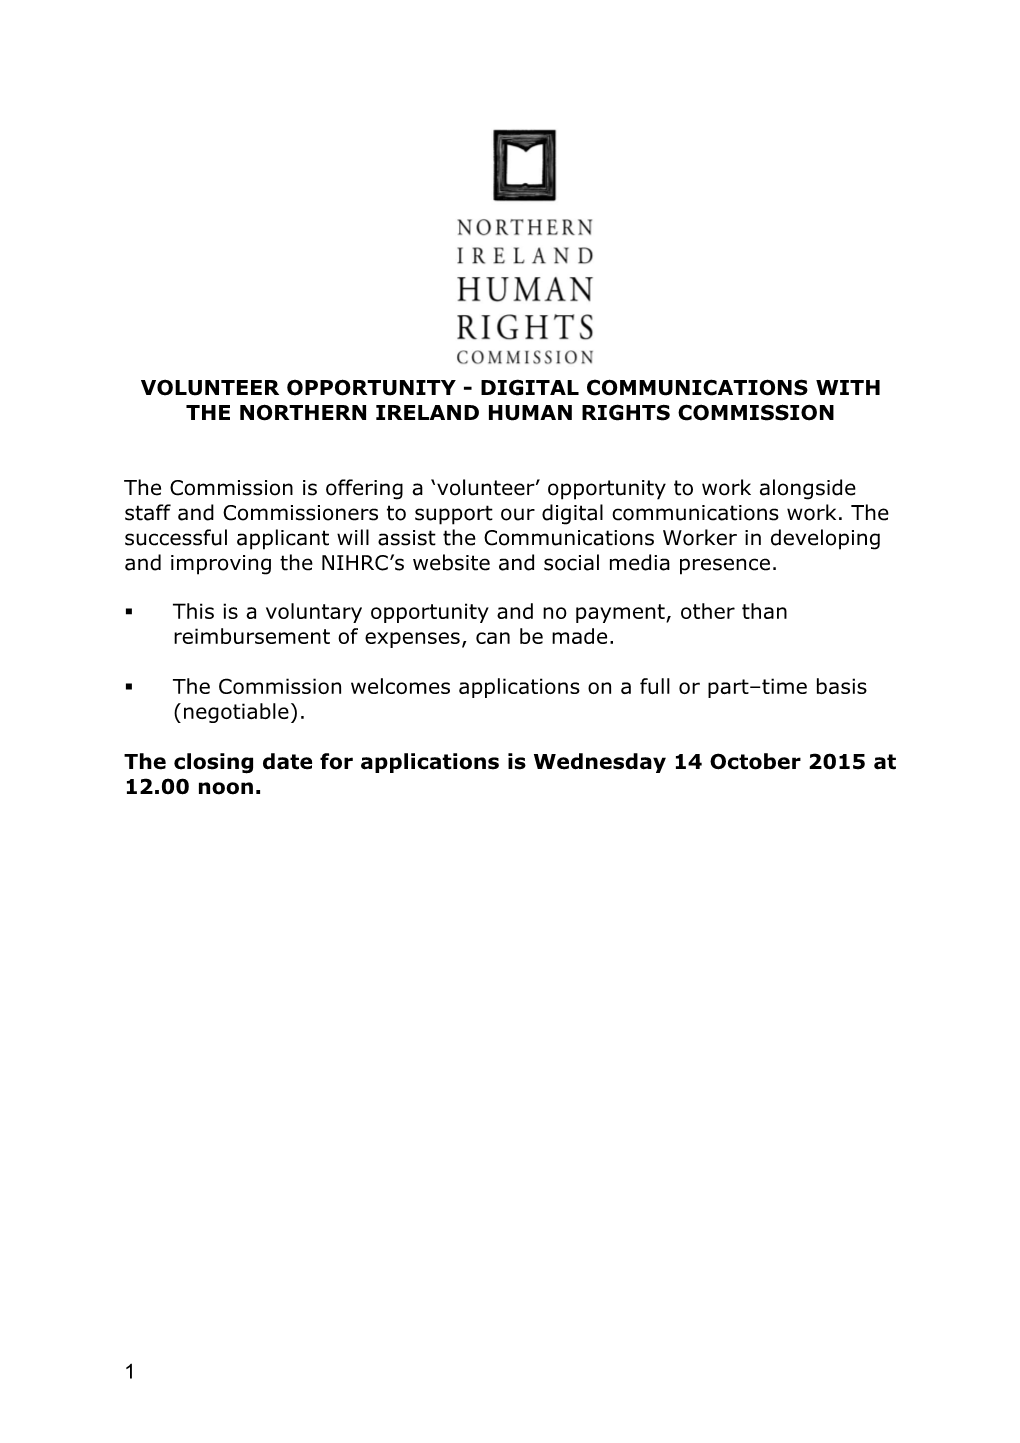 Volunteer Opportunity - Digital Communications with the Northern Ireland Human Rights